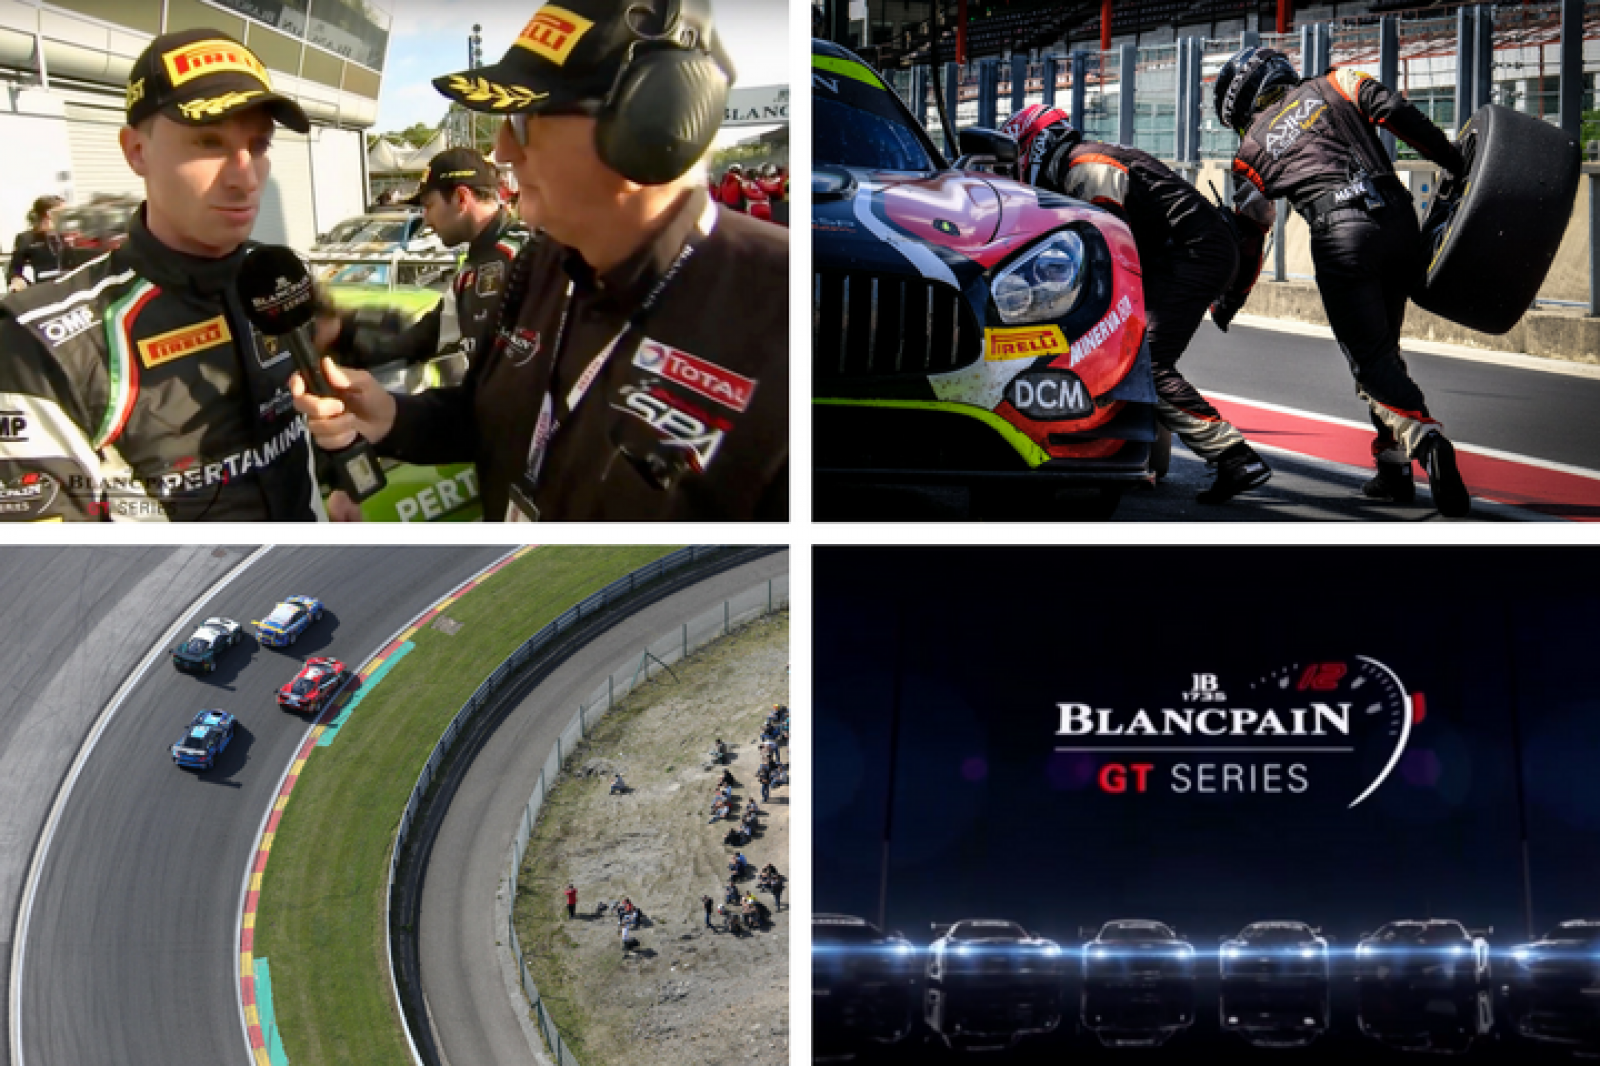 Blancpain GT Series confirms extensive TV and online coverage for 2018 season